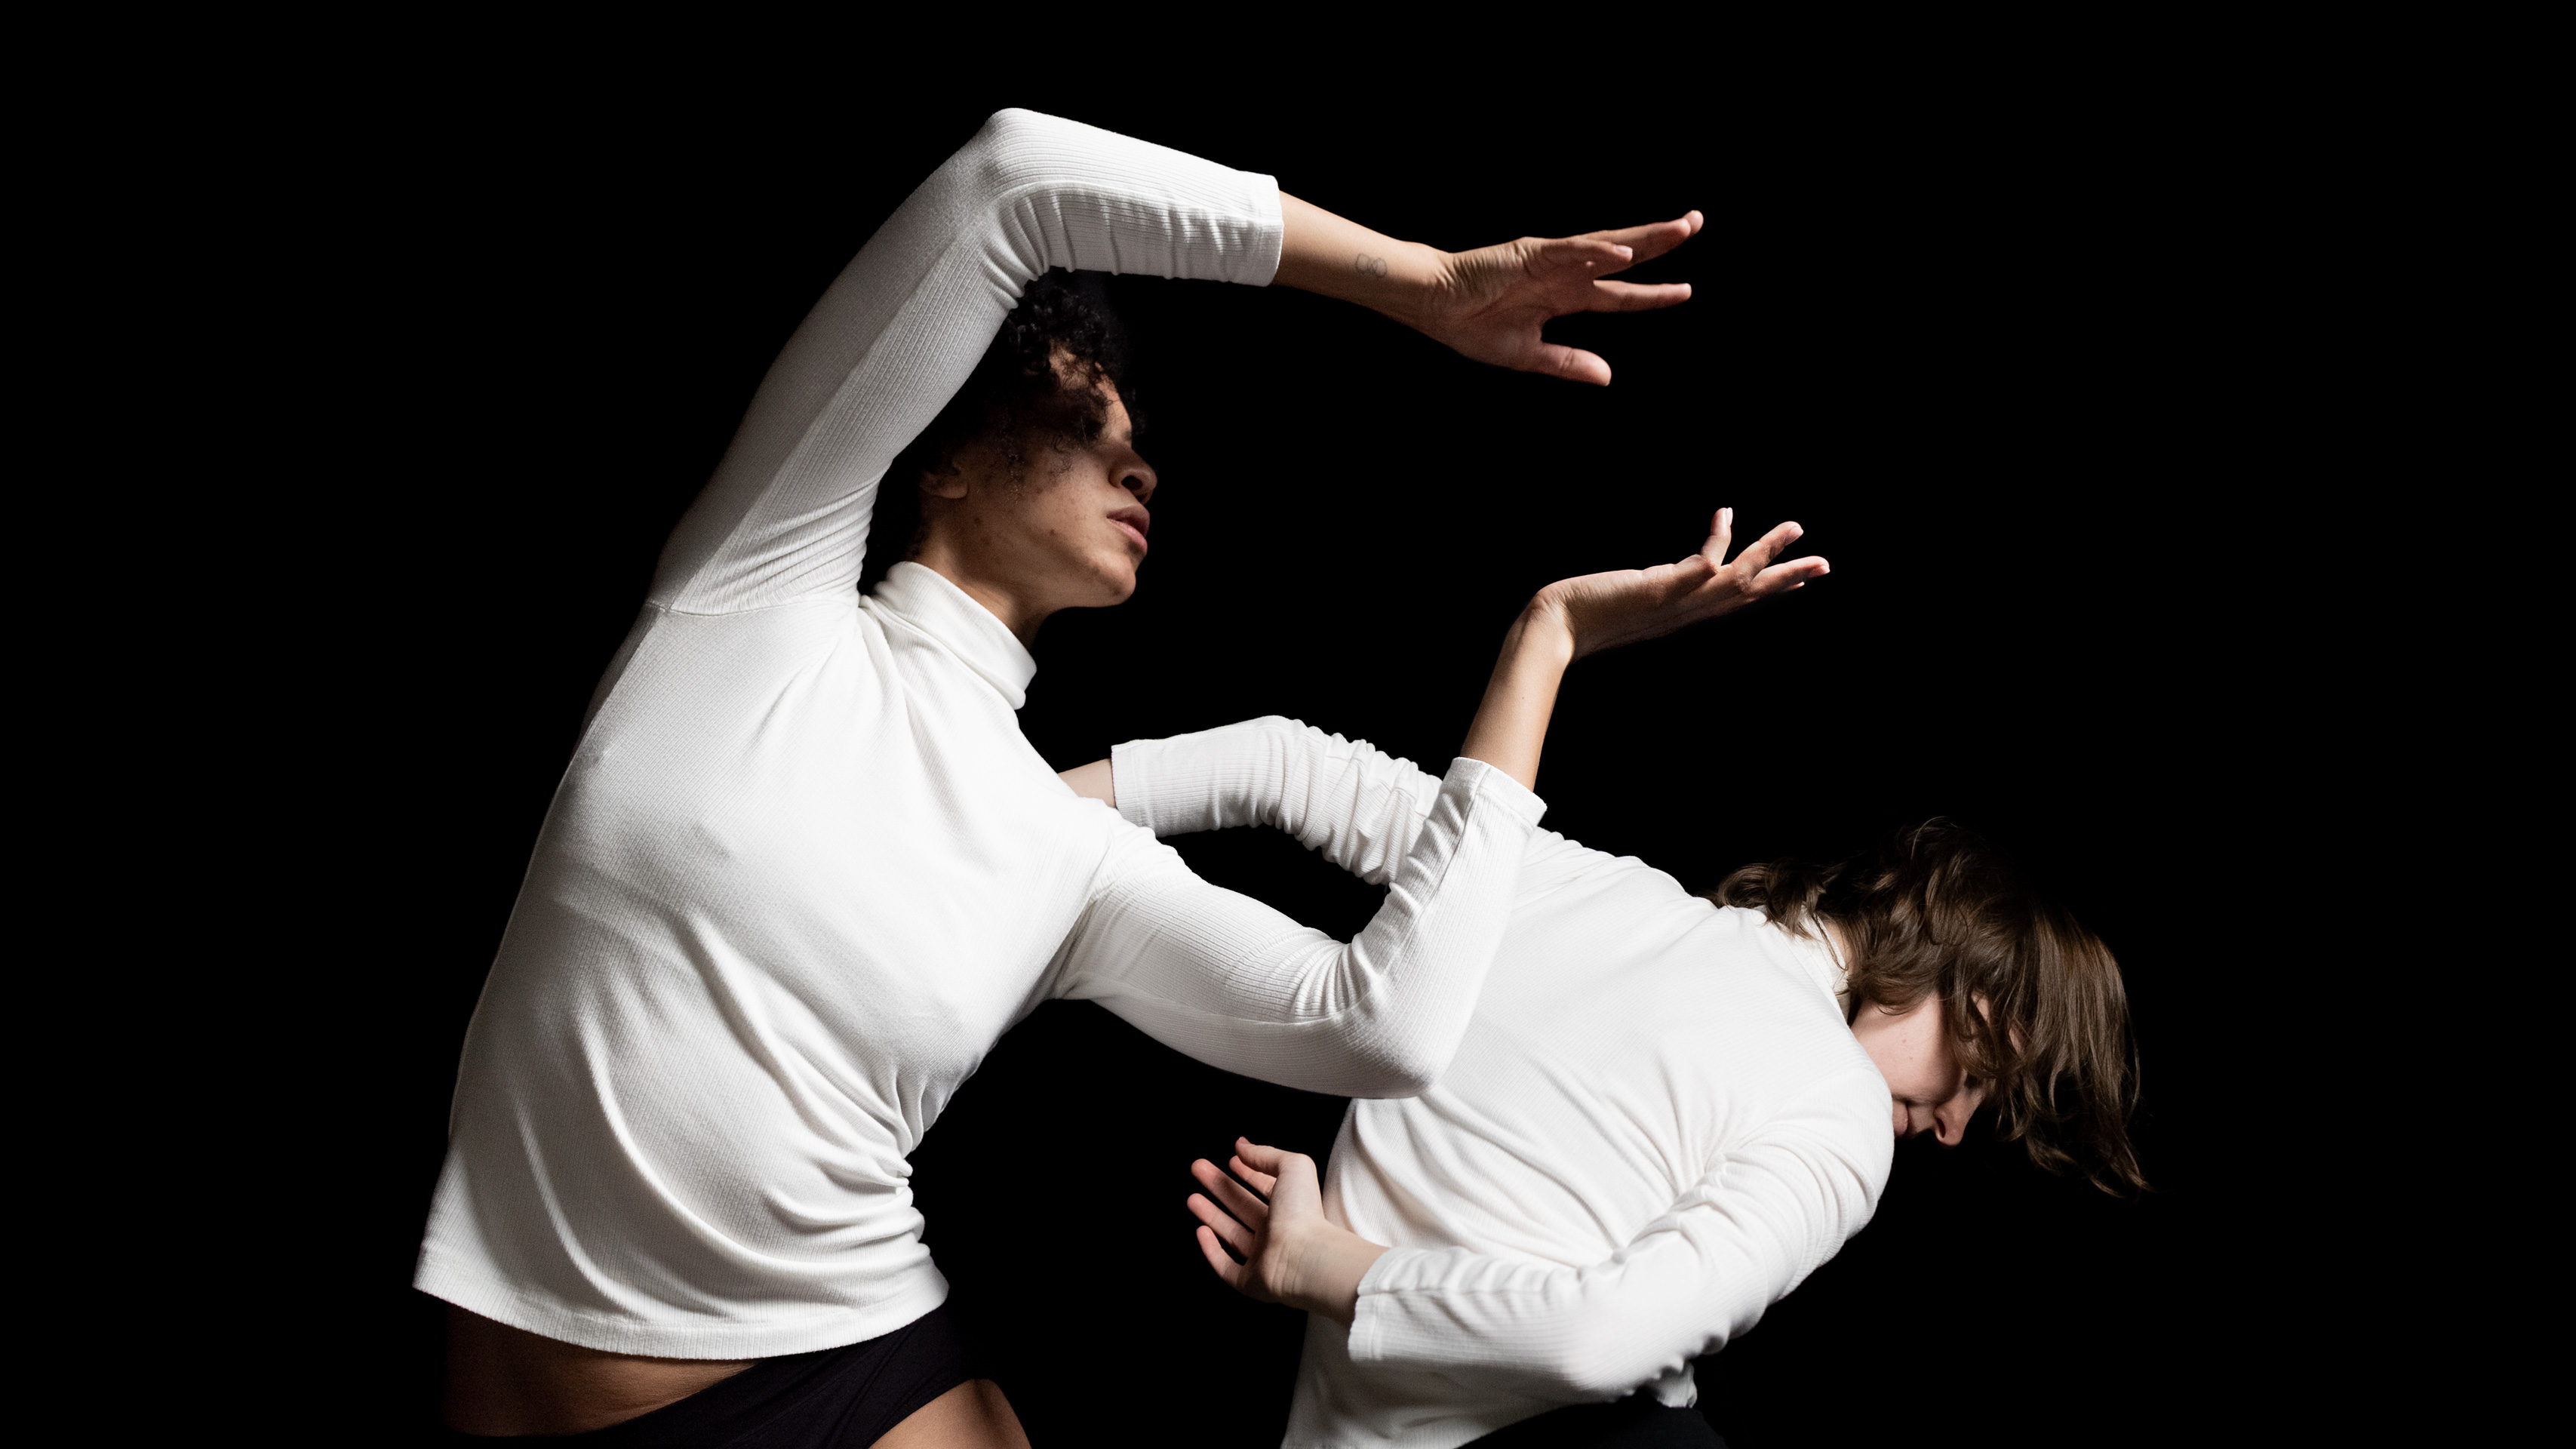 push/FOLD dancers Briley Jozwiak and Ashley Morton perform 'Wolf' at the Alberta Rose Theatre in Portland, Oregon. Photo depicts both dancers in white knit shirts in angular and gestural postures | Photography: Samuel Hobbs & Holly Shaw